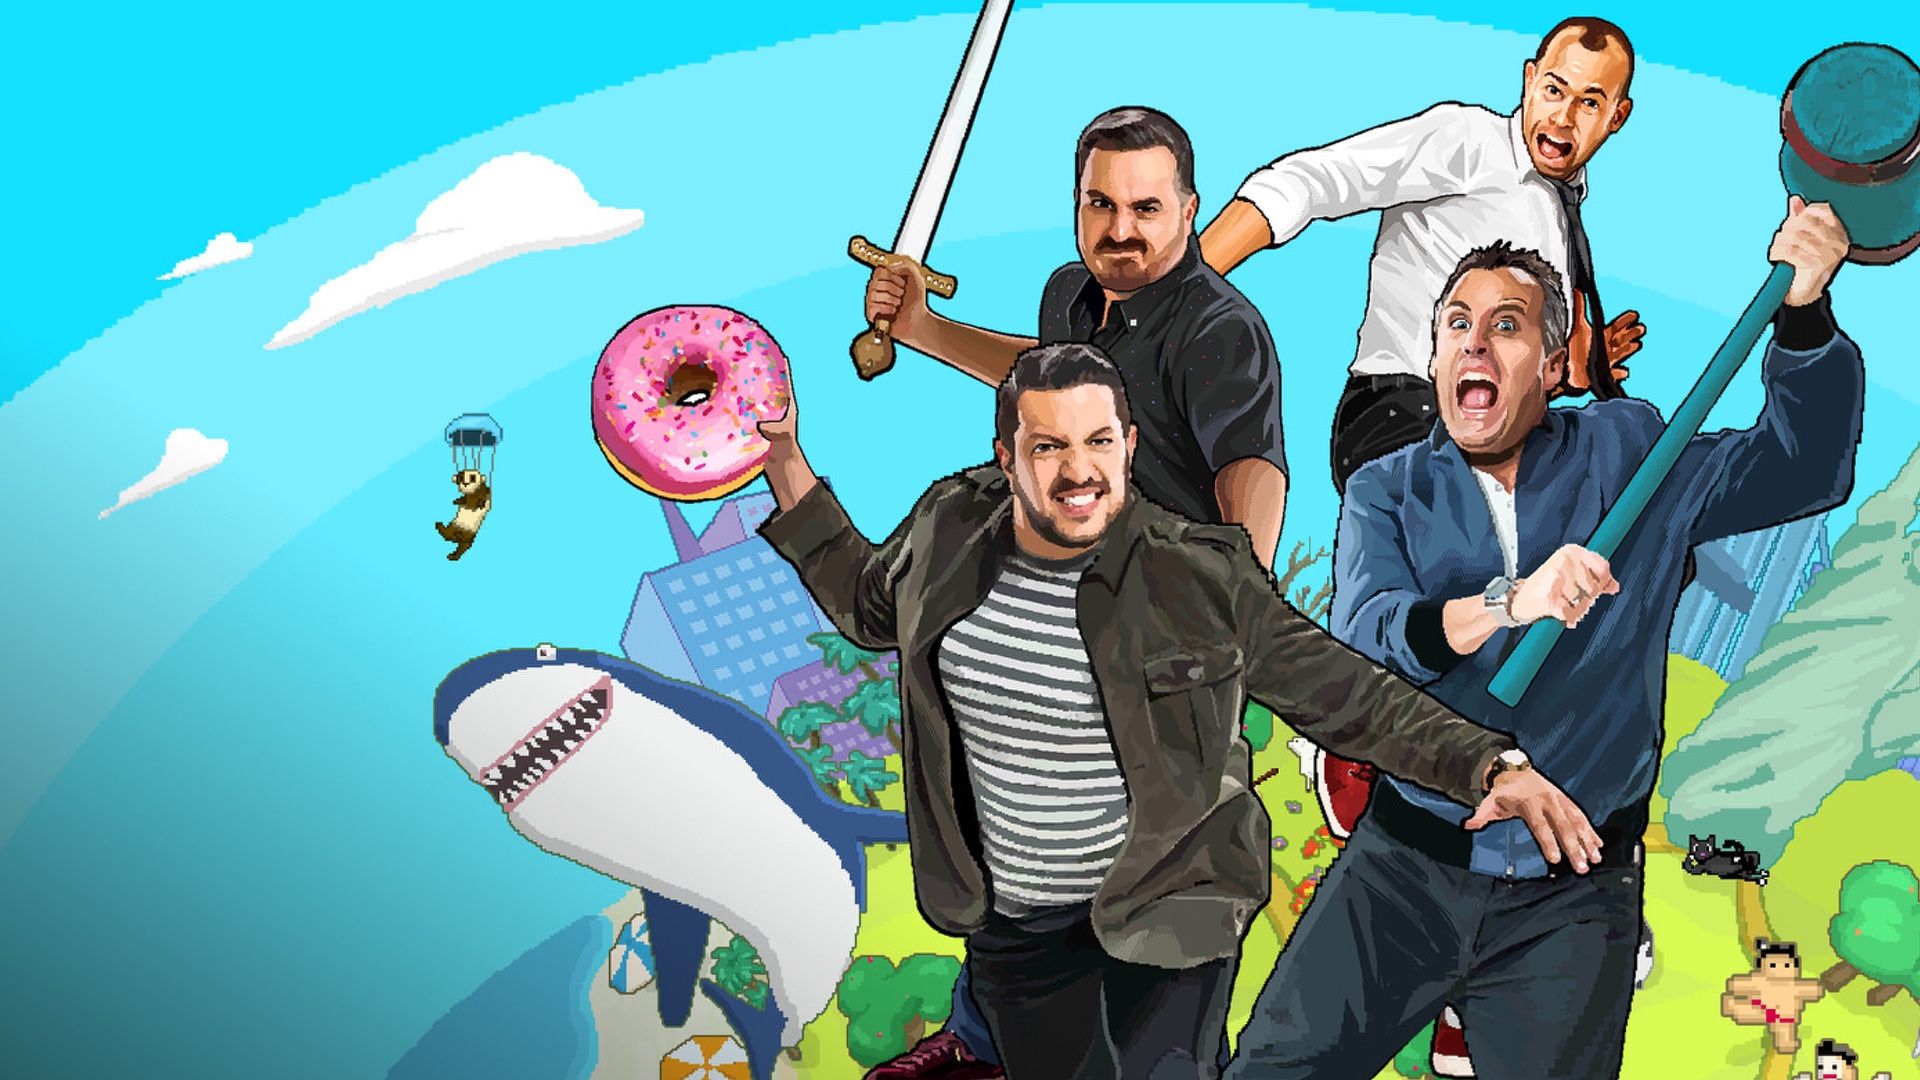 IMPRACTICAL JOKERS Renewed For Season 8 and There Will Be a